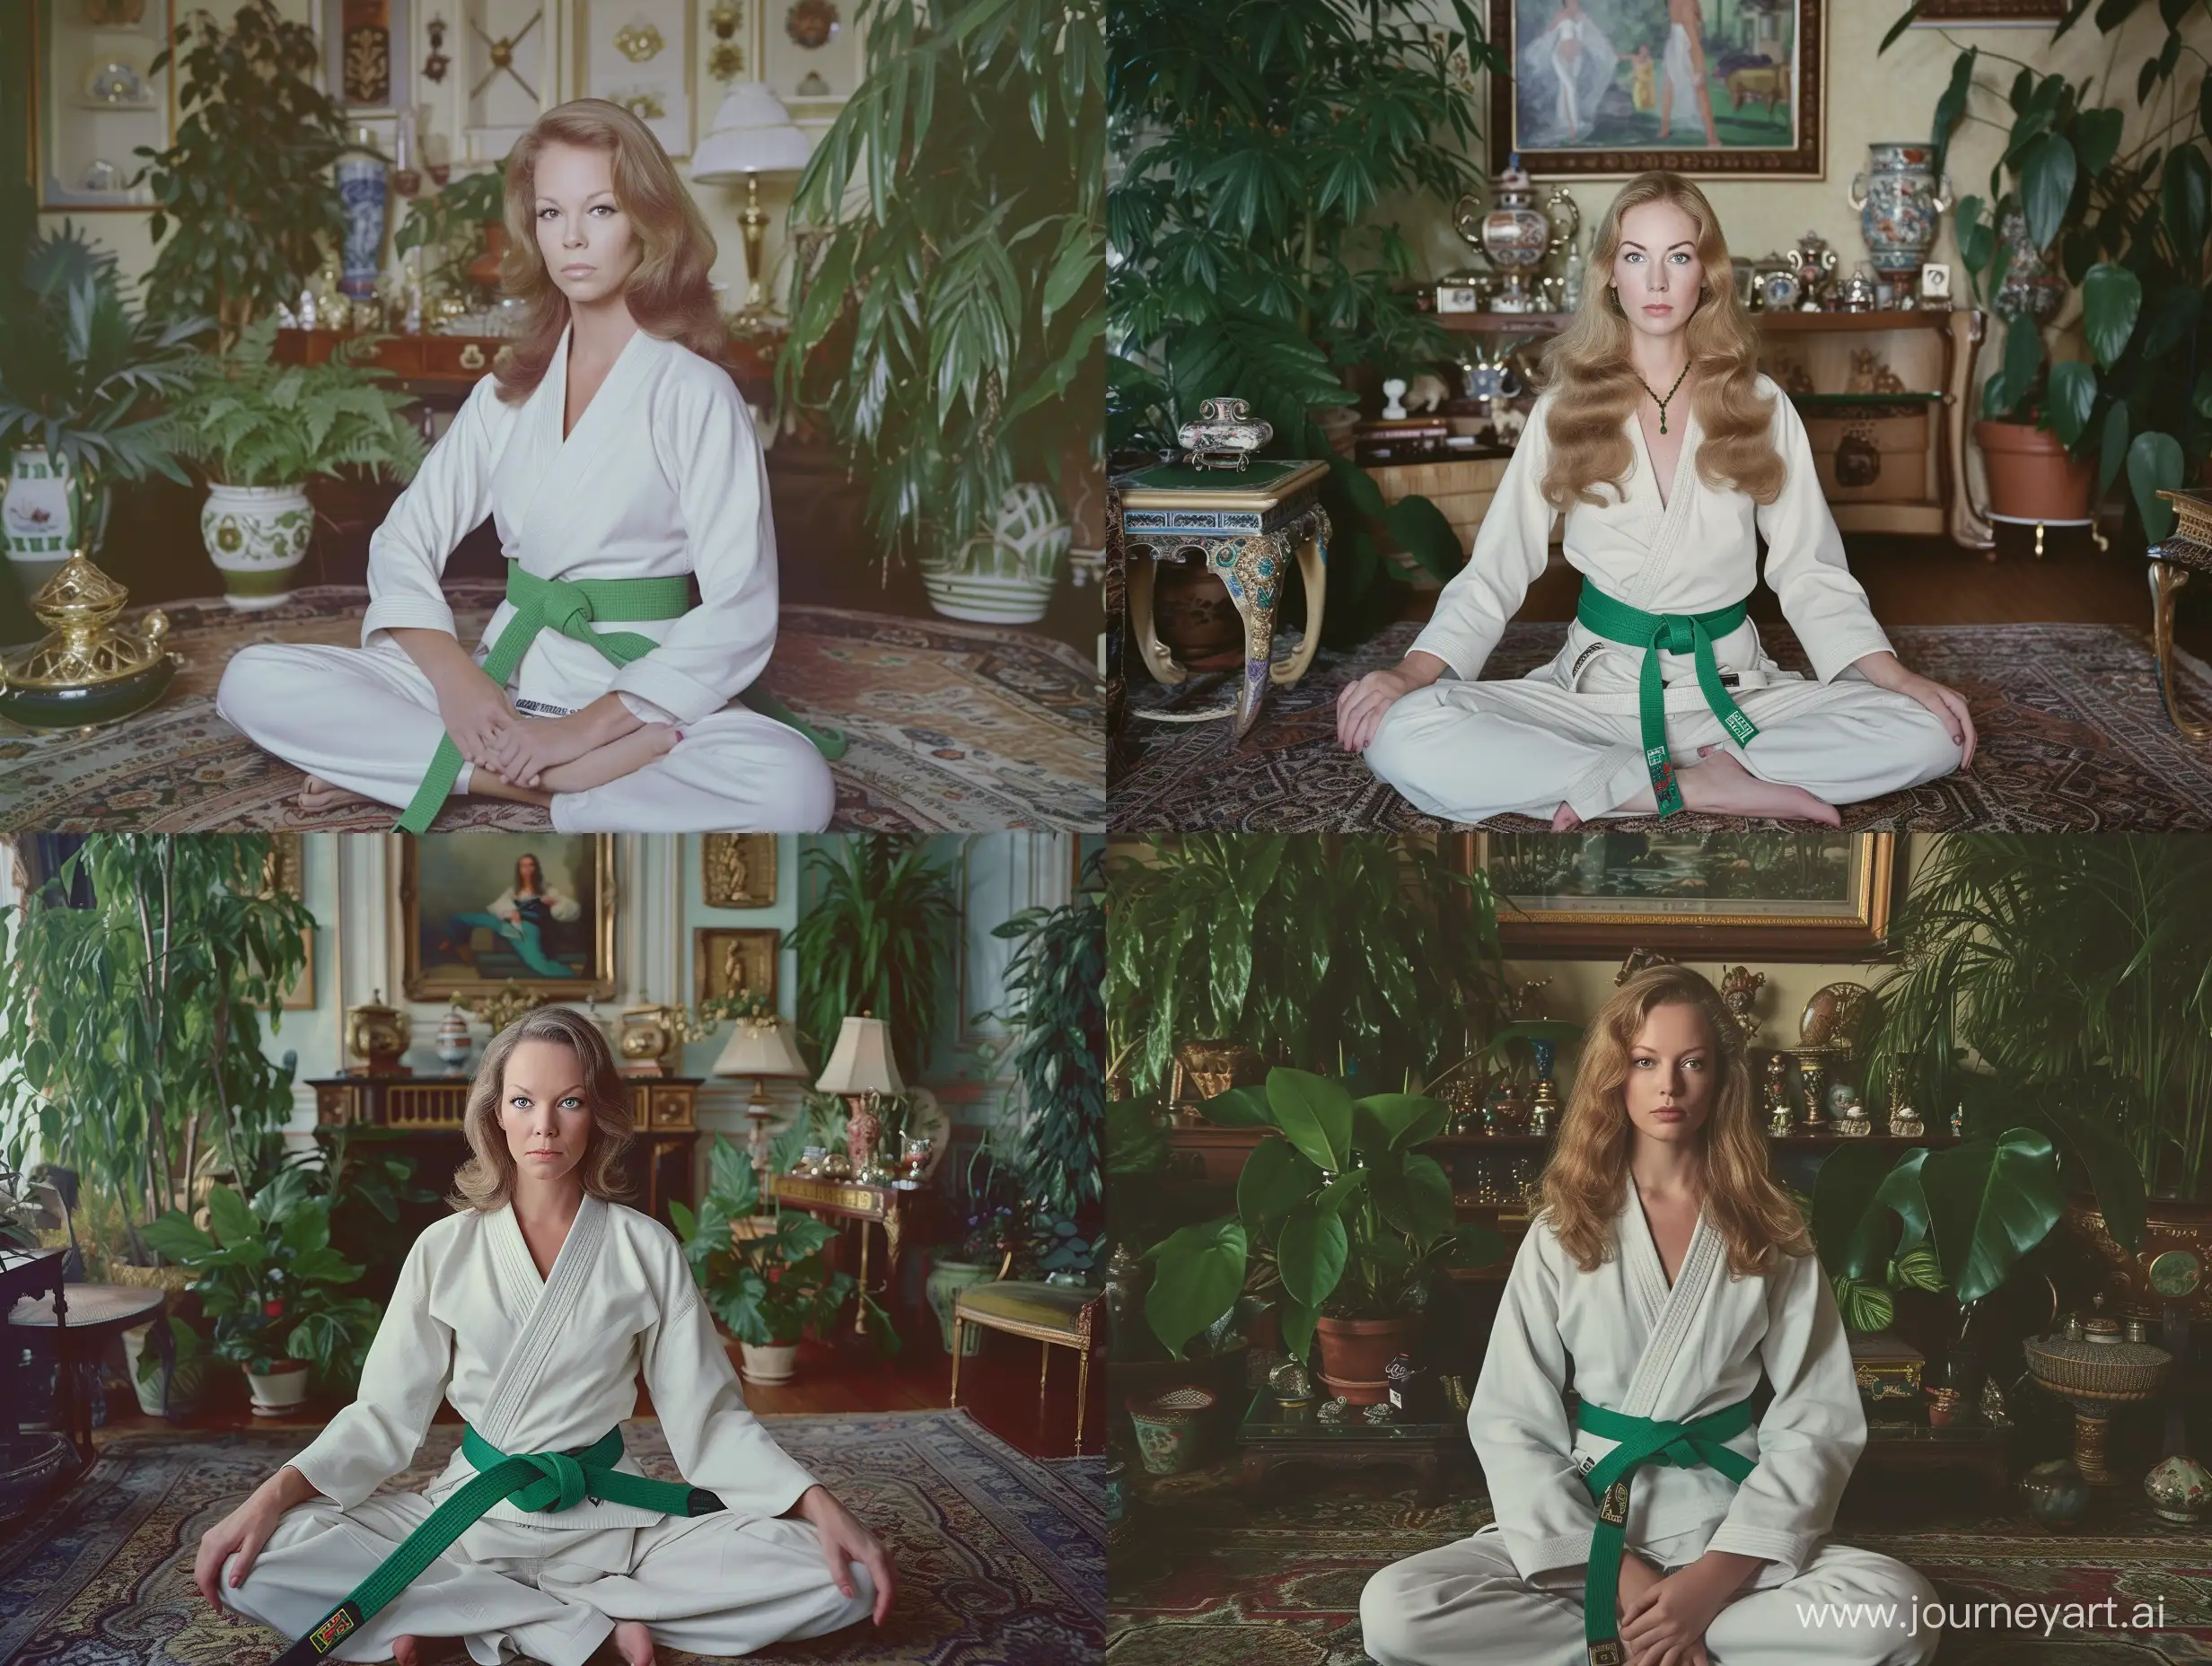 a 4K color photo taken by a professional photographer for a feminist magazine in the 70'. It shows a gorgeous Caucasian woman, 35 years old, who poses proudly in her wealthy living-room, among green plants, luxury trinkets and furniture, master. paintings She is wearing a white judogi with a green belt, sits cross-legged on a carpet and faces quietly with a clever and expressive look.